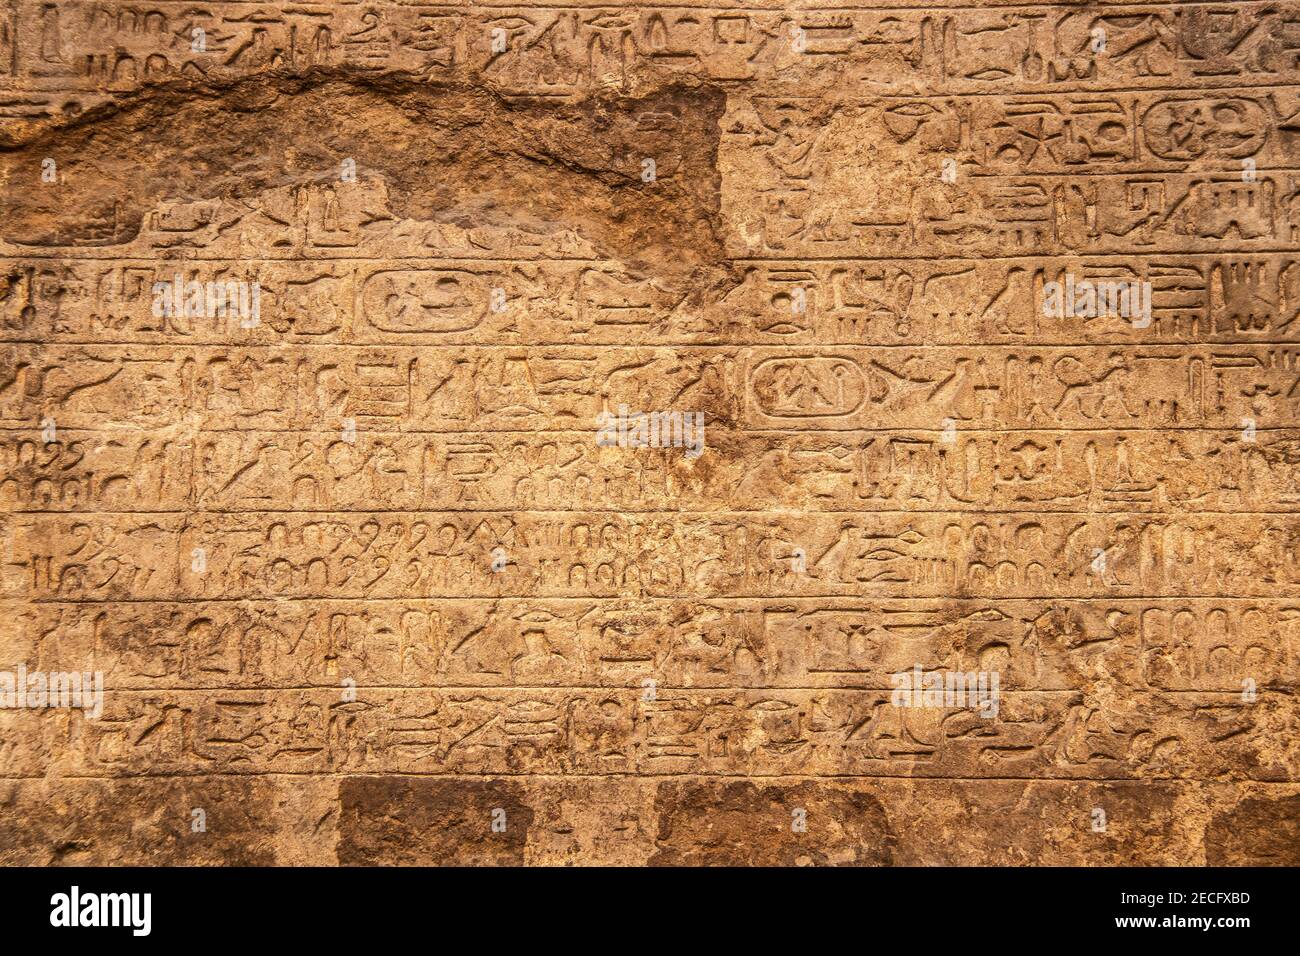 Background - Carved ancient Egyptian writing or hieroglyphics-sacred carvings or mdju netjer meaning words of the gods - in horizontal rows - damaged Stock Photo